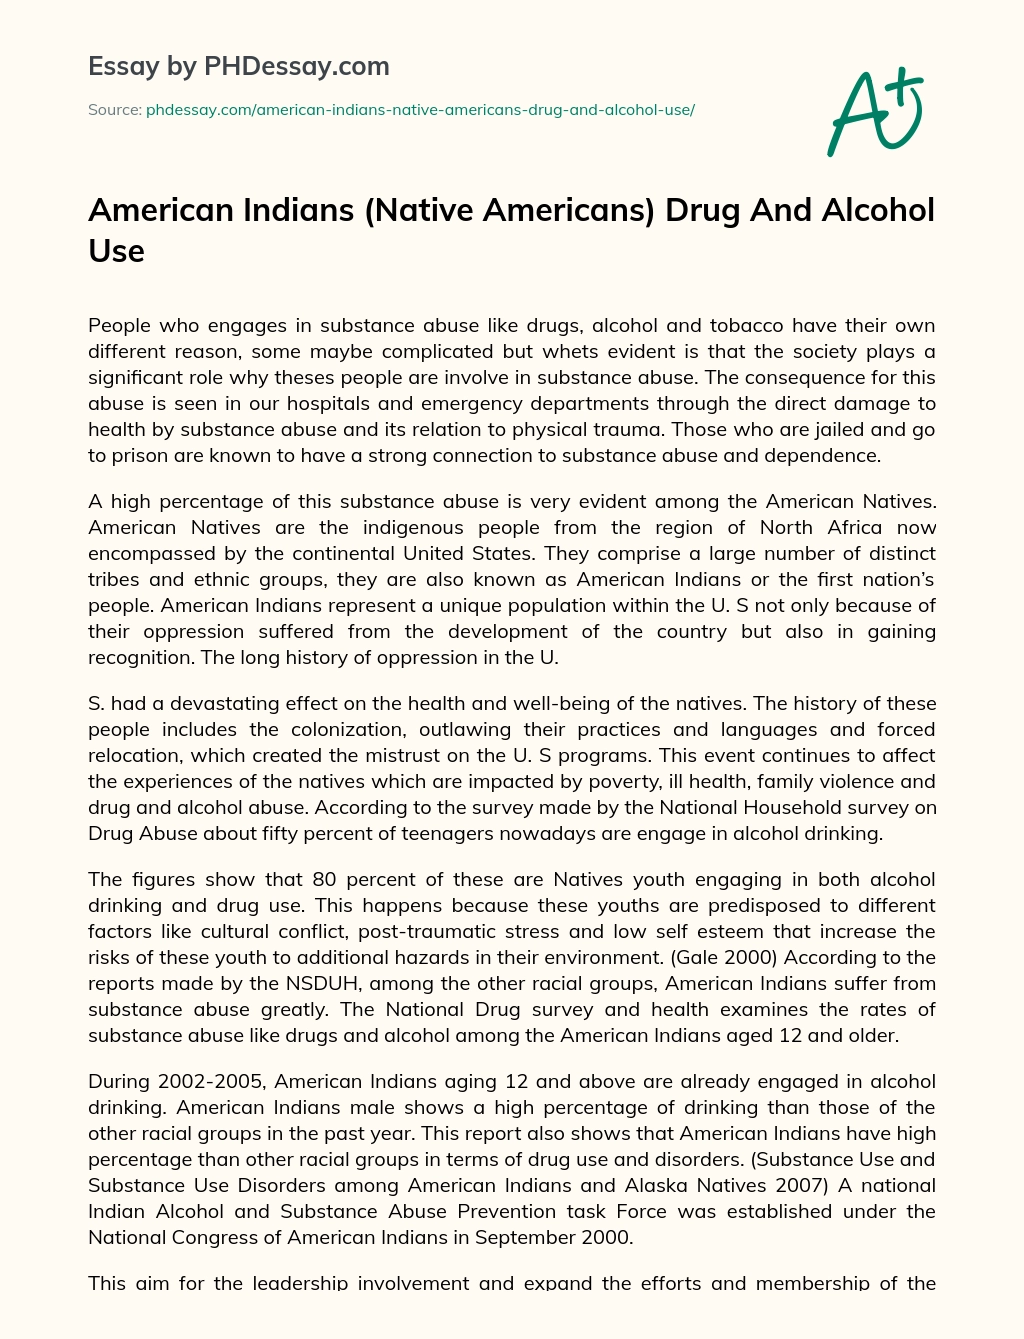 American Indians (Native Americans) Drug And Alcohol Use essay